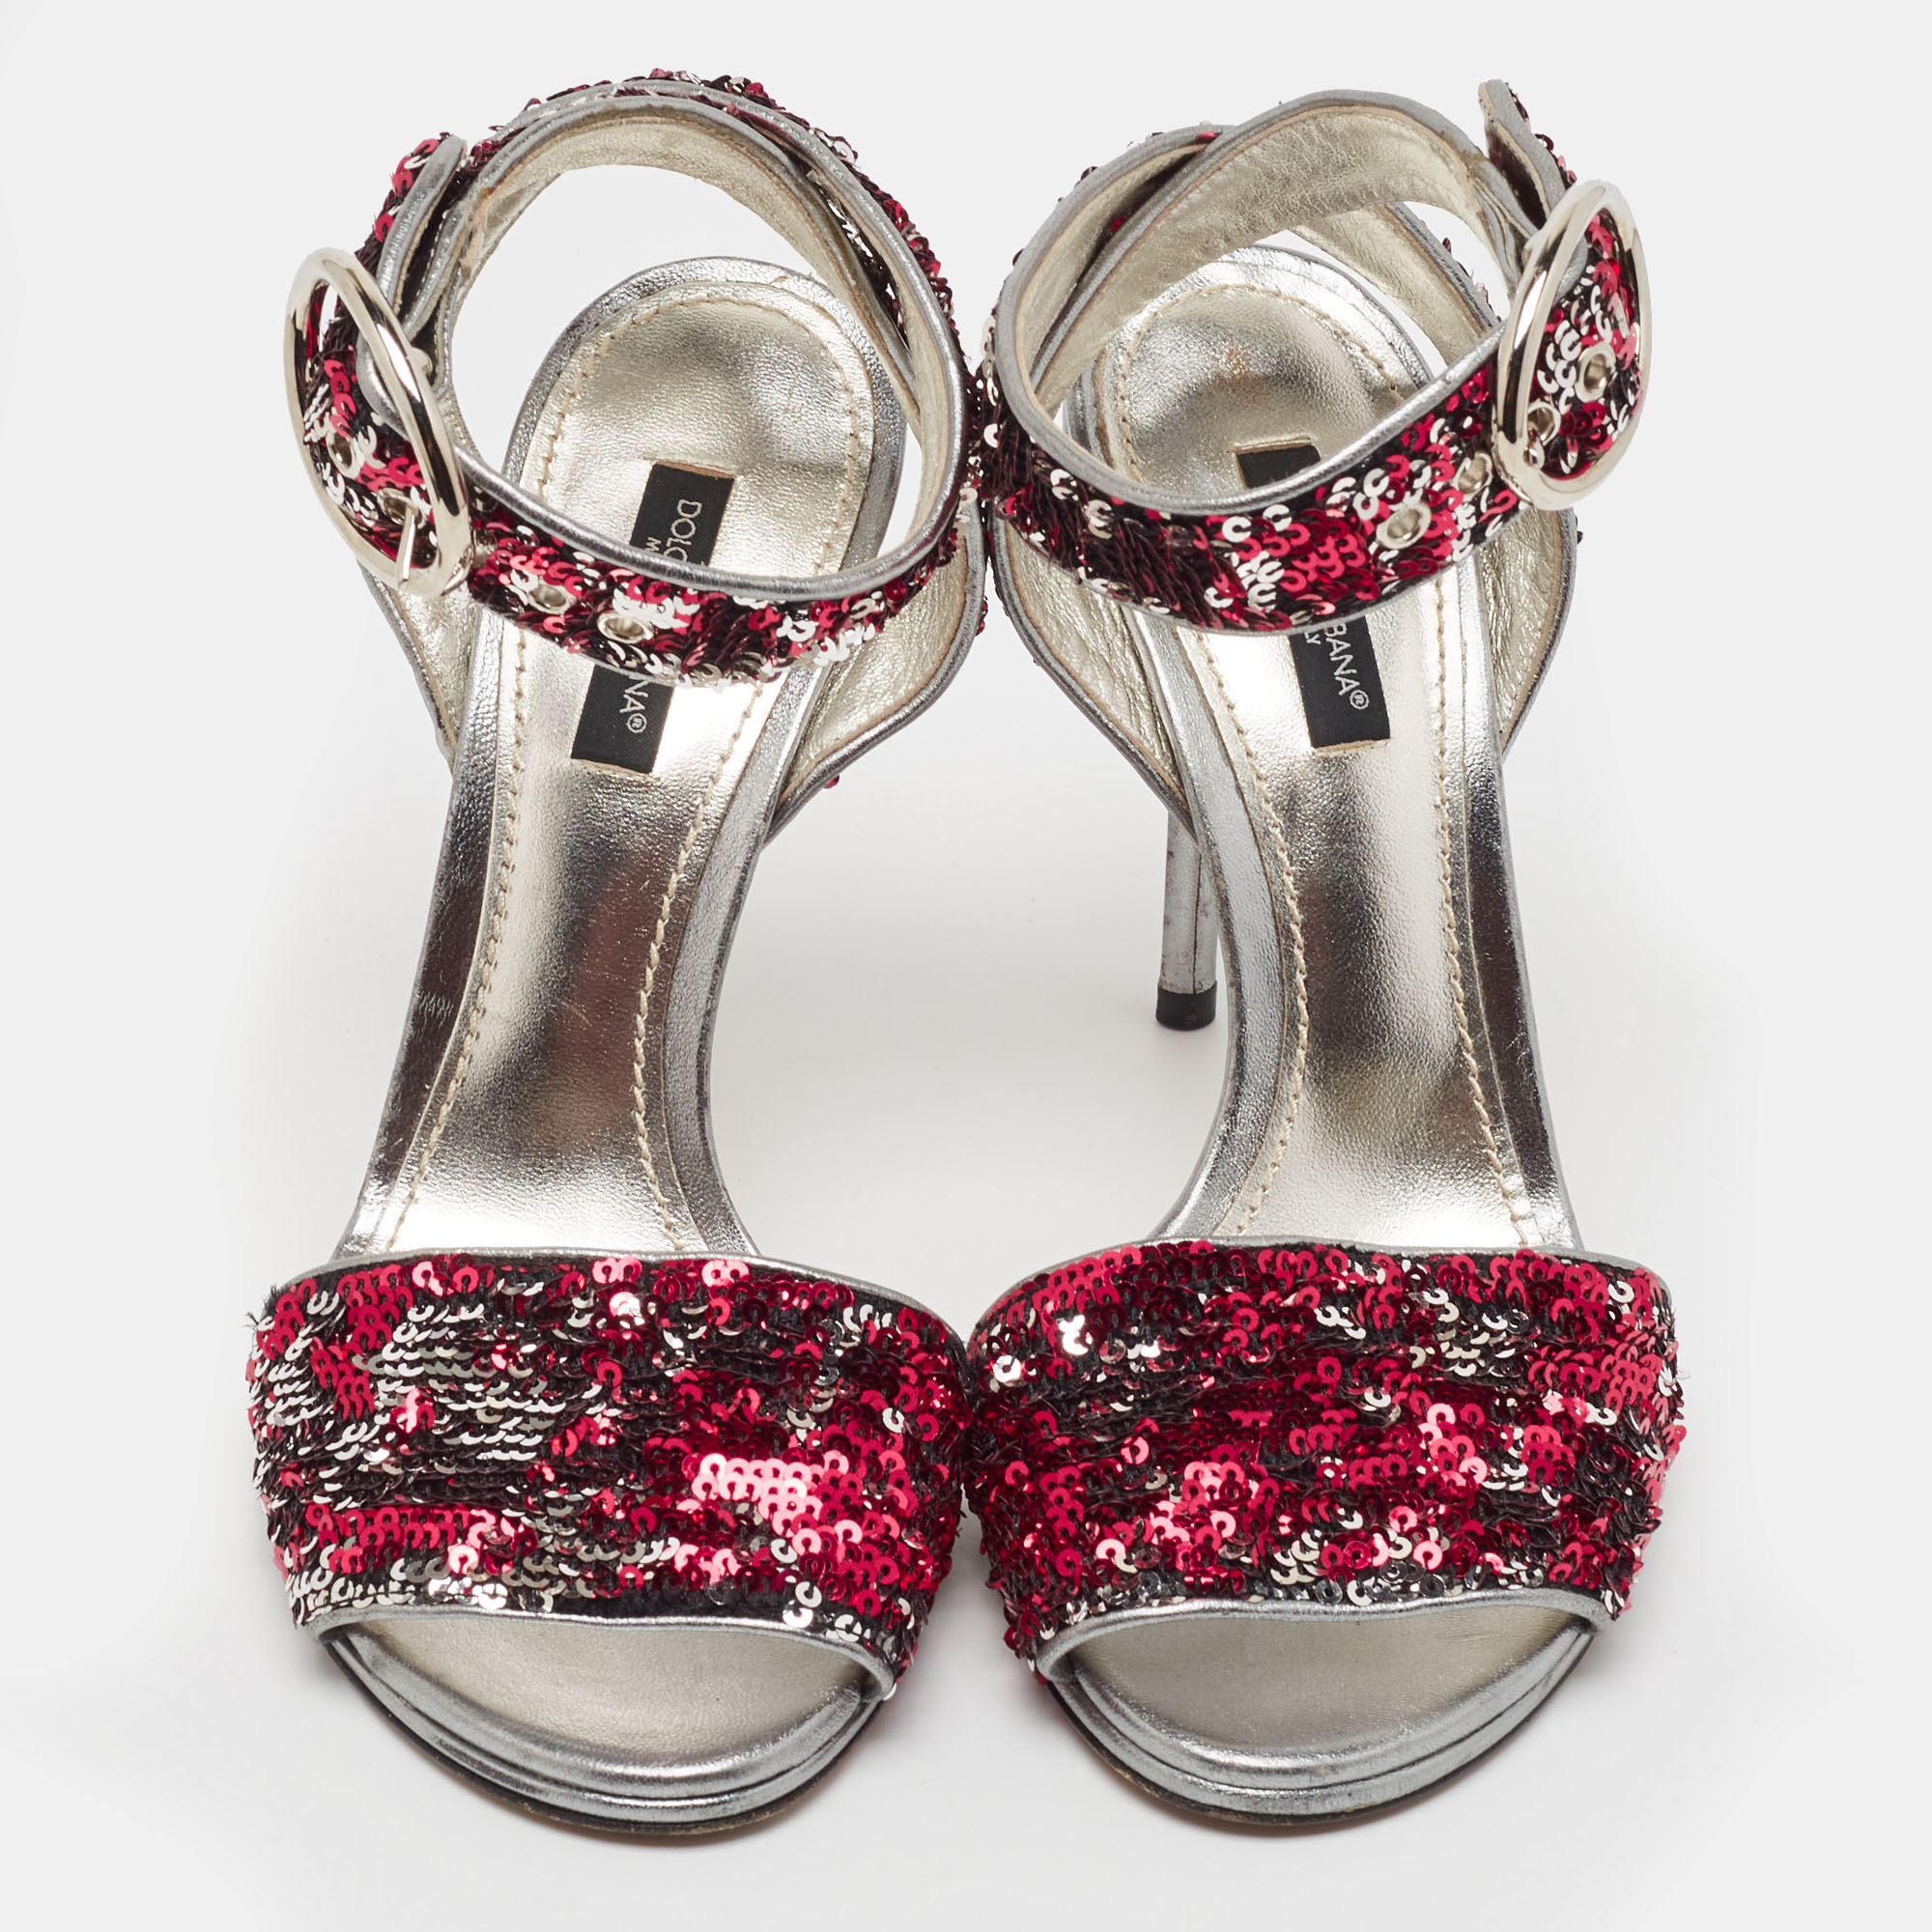 Dolce & Gabbana Metallic Pink/Silver Sequins Ankle Strap Sandals Size 37